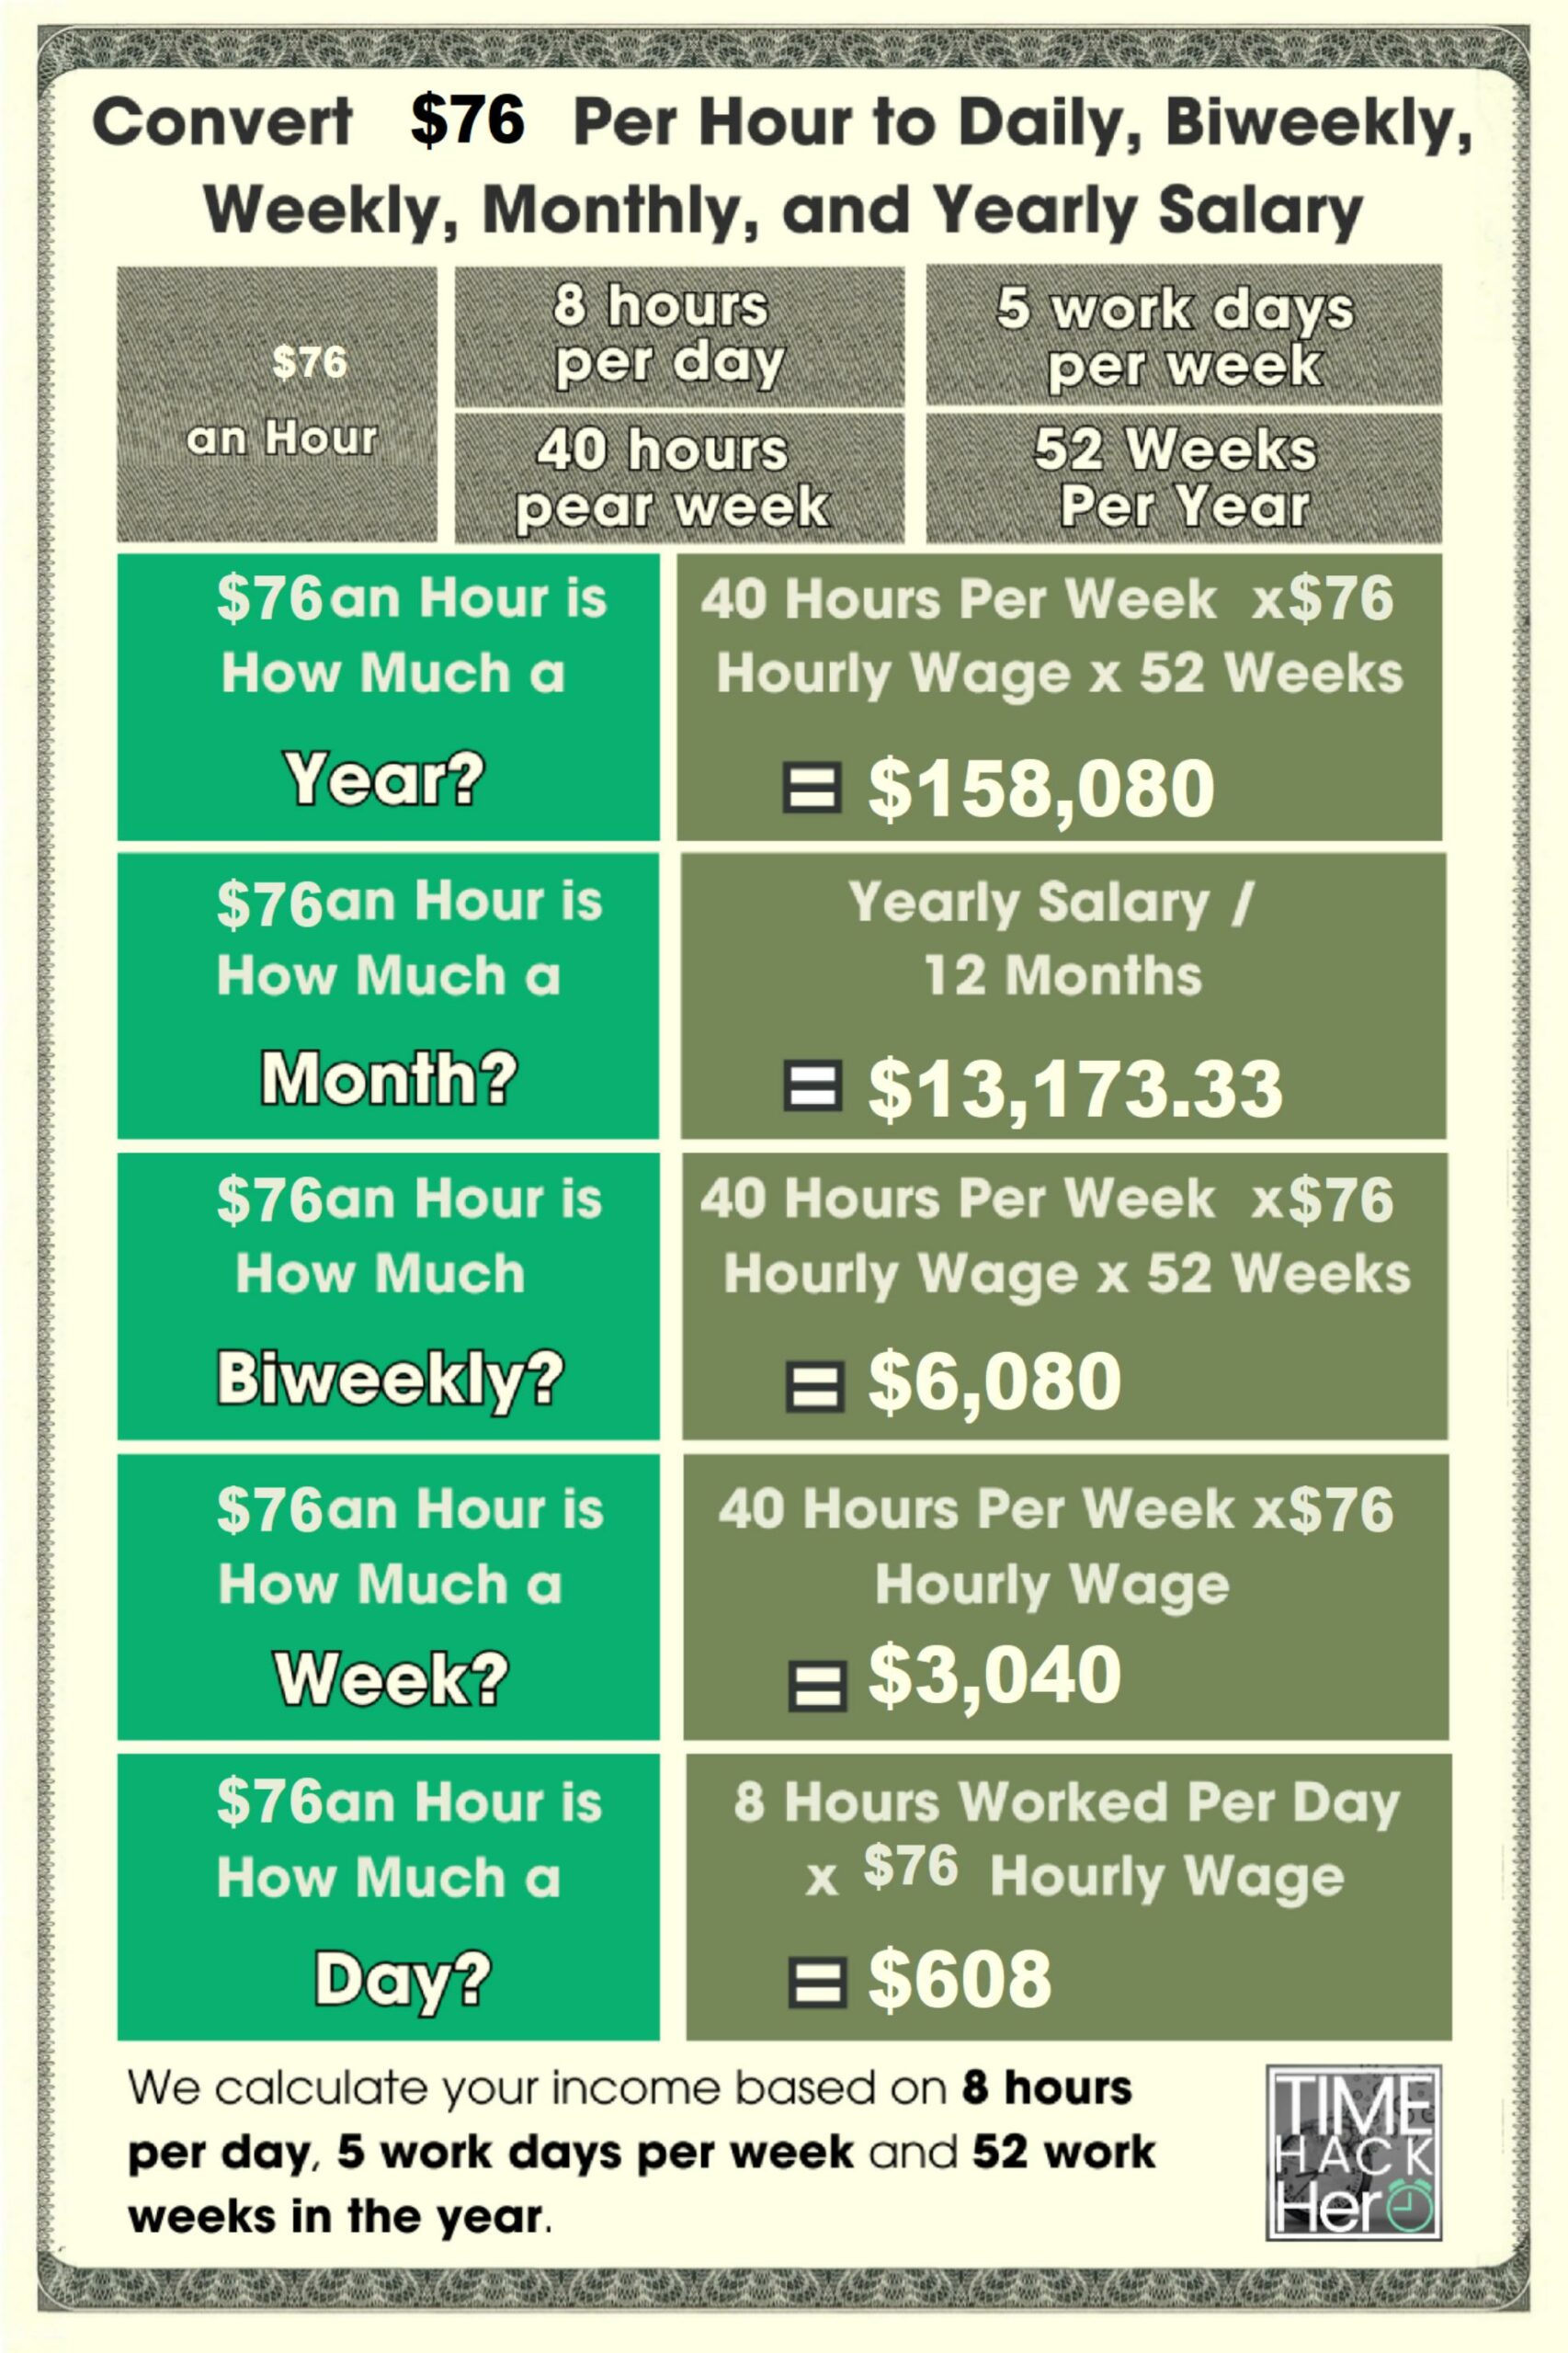 Convert $76 Per Hour to Weekly, Monthly, and Yearly Salary